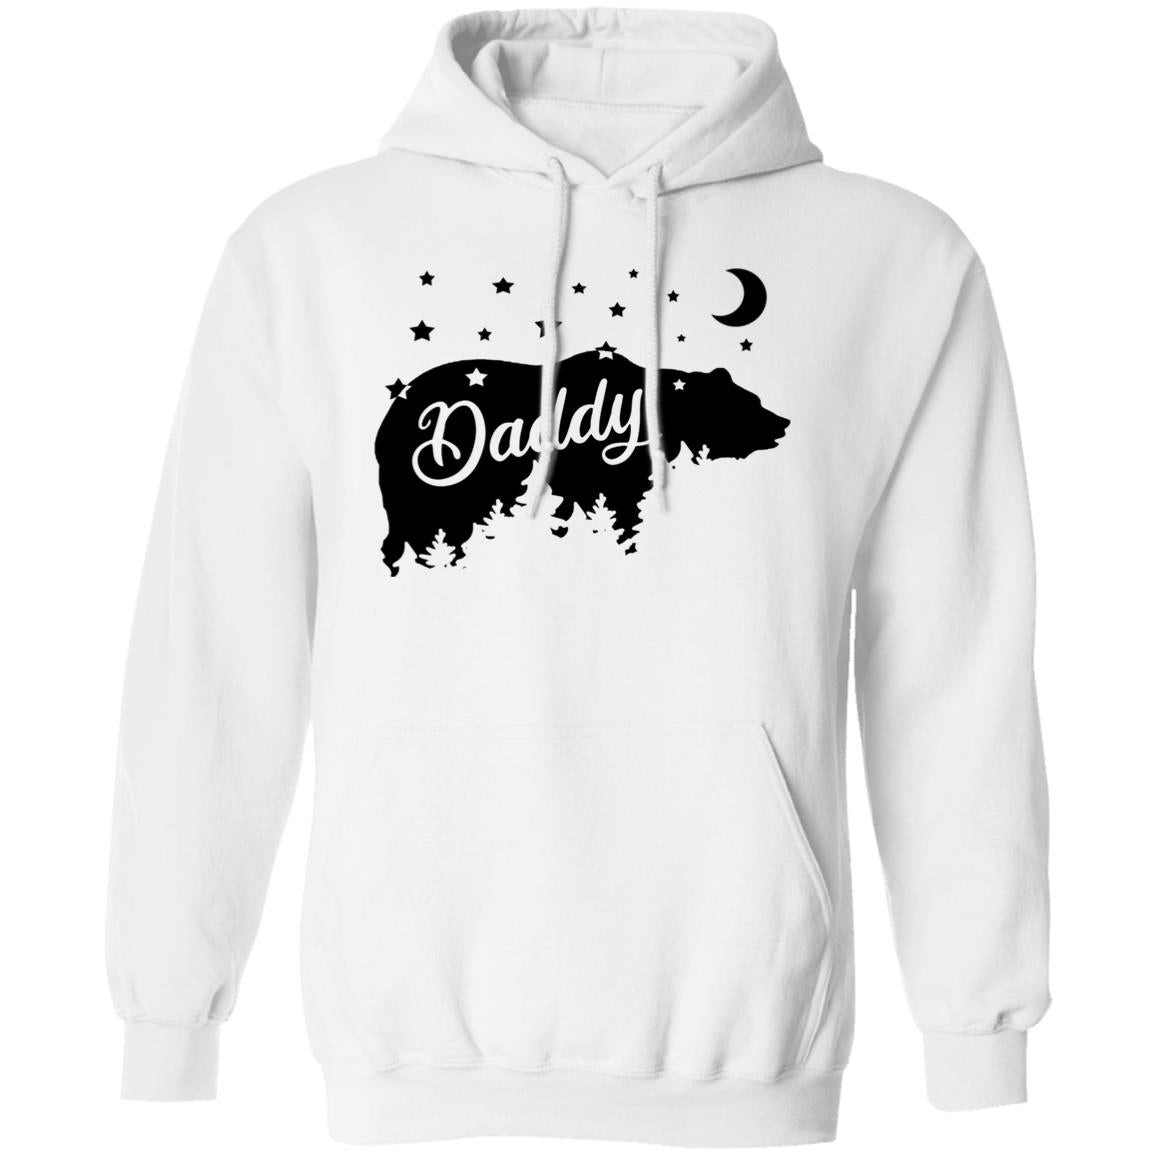 Daddy Pullover Hoodie